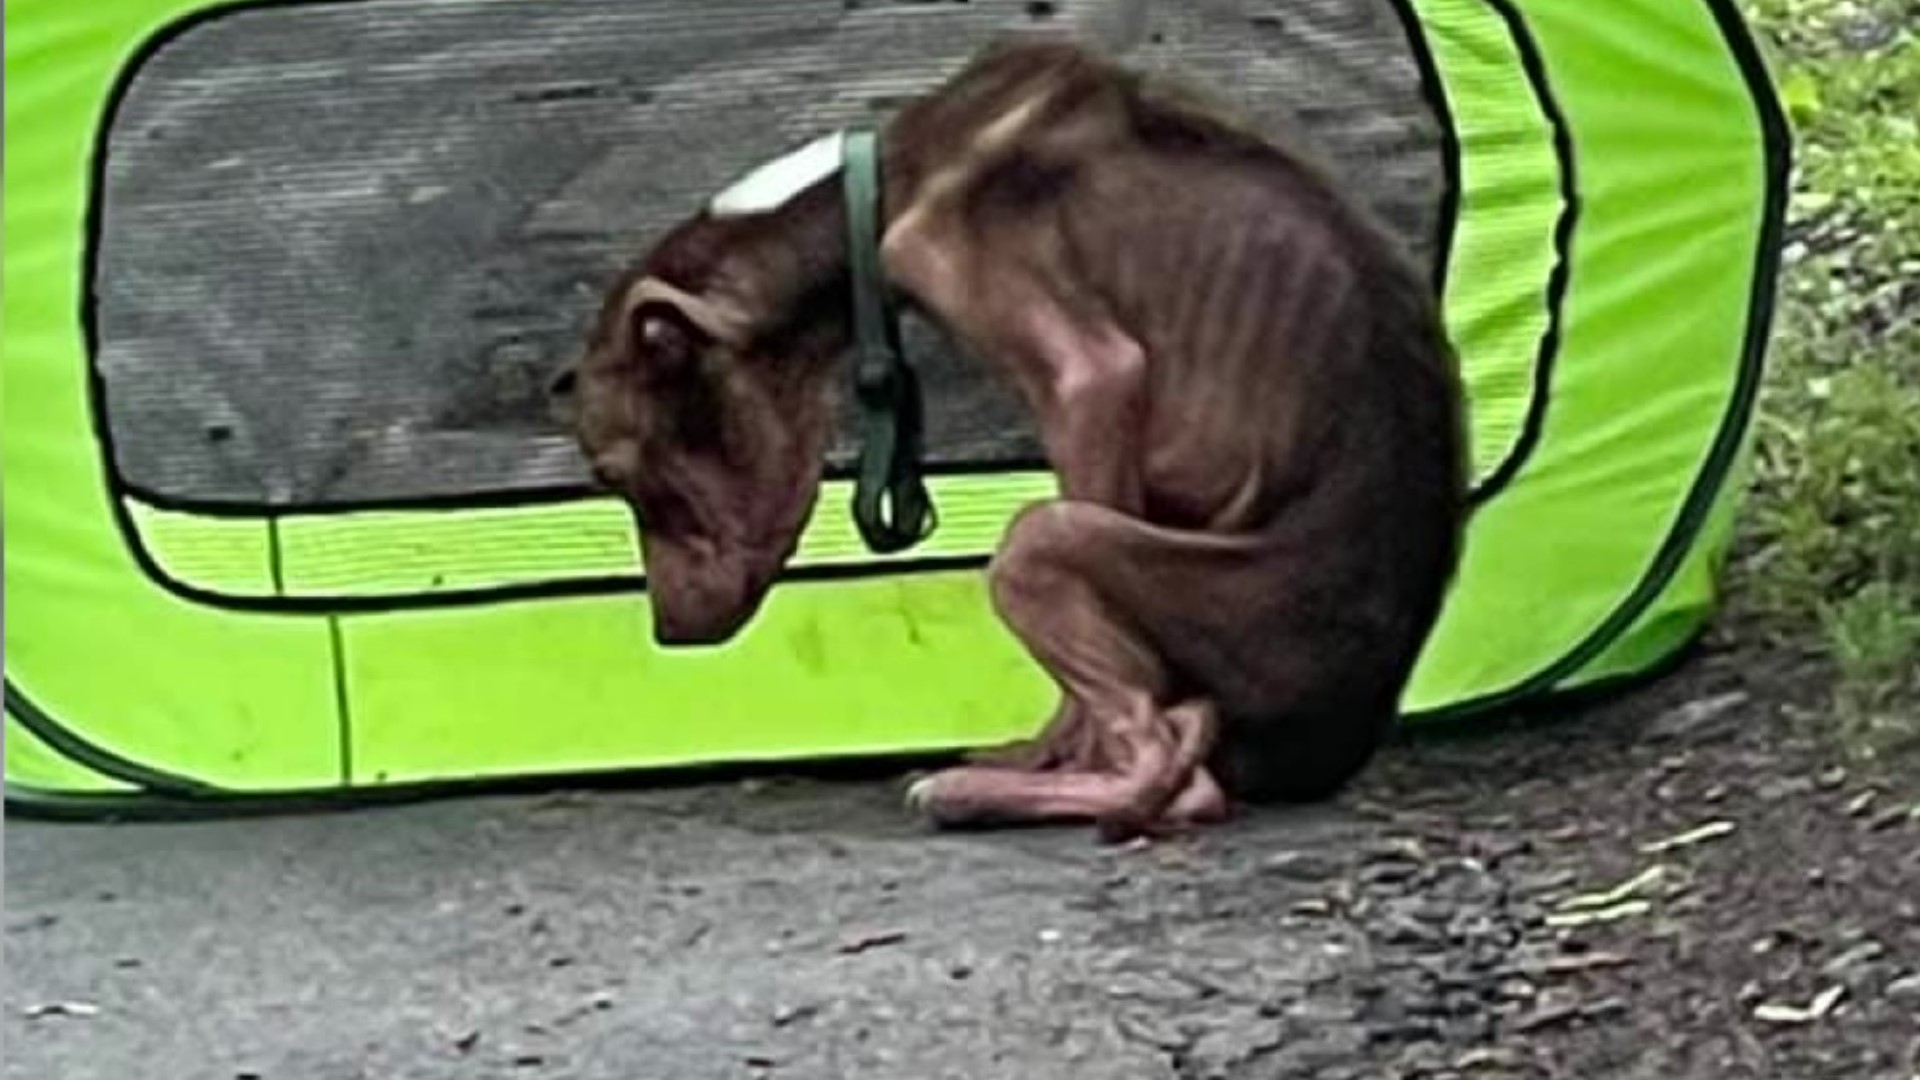 Officials call it the worst case of animal abuse they've ever seen. Neighbors called authorities after finding an emaciated dog Tuesday morning.